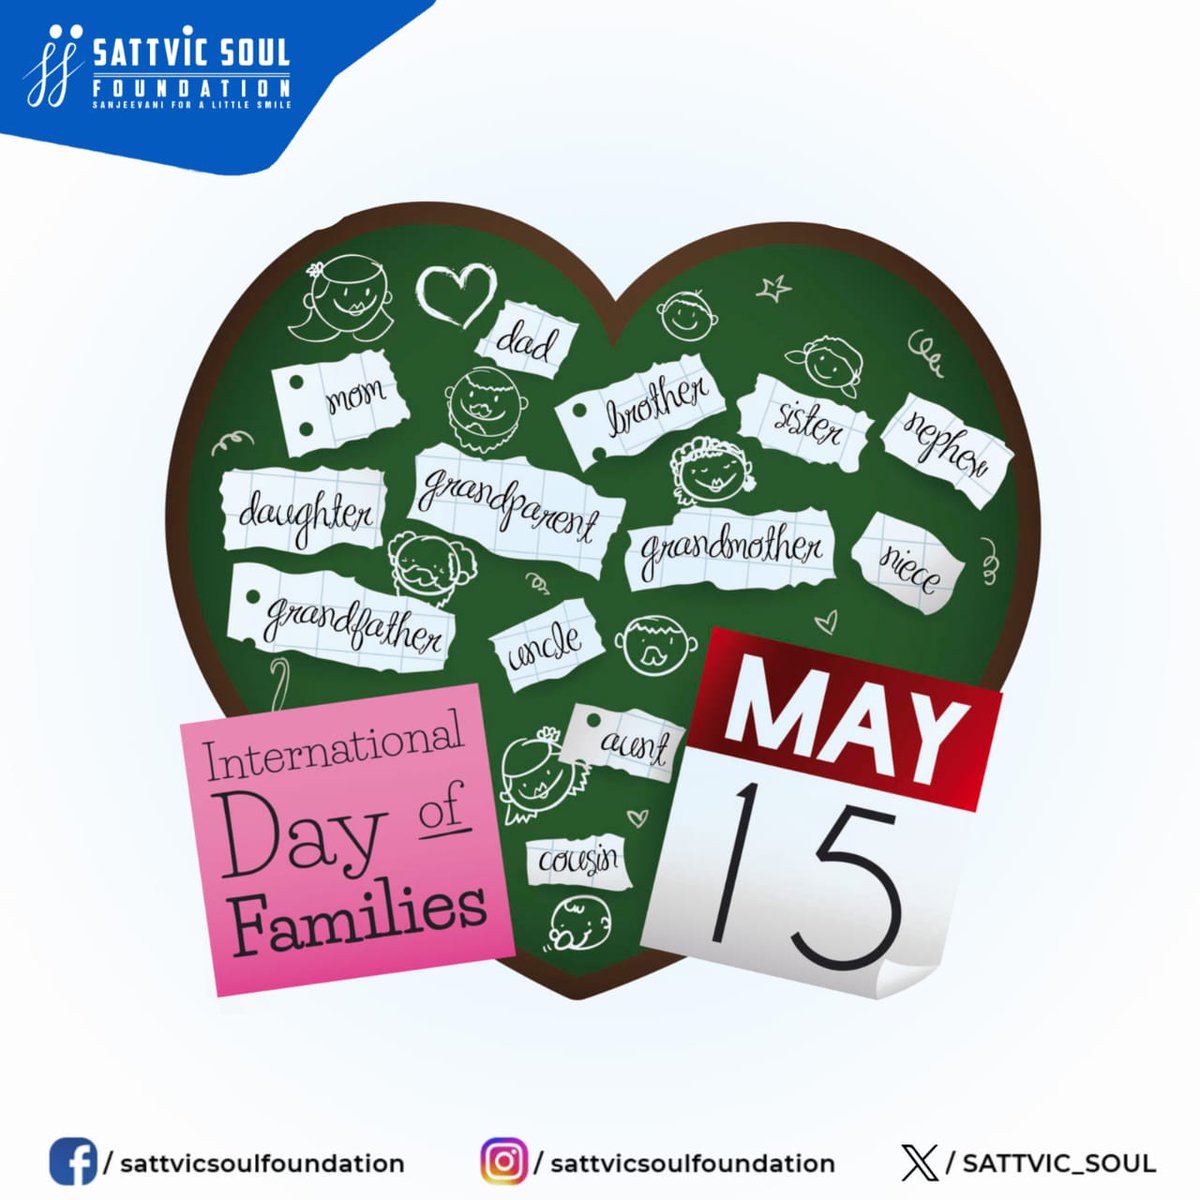 We recognize the importance of adoption and foster care in providing loving homes. Let us celebrate the diversity within families and support the journey to finding safe, loving, and permanent homes. #everychilddeserveslove #bestinterestsofthechild #InternationalDayofFamilies